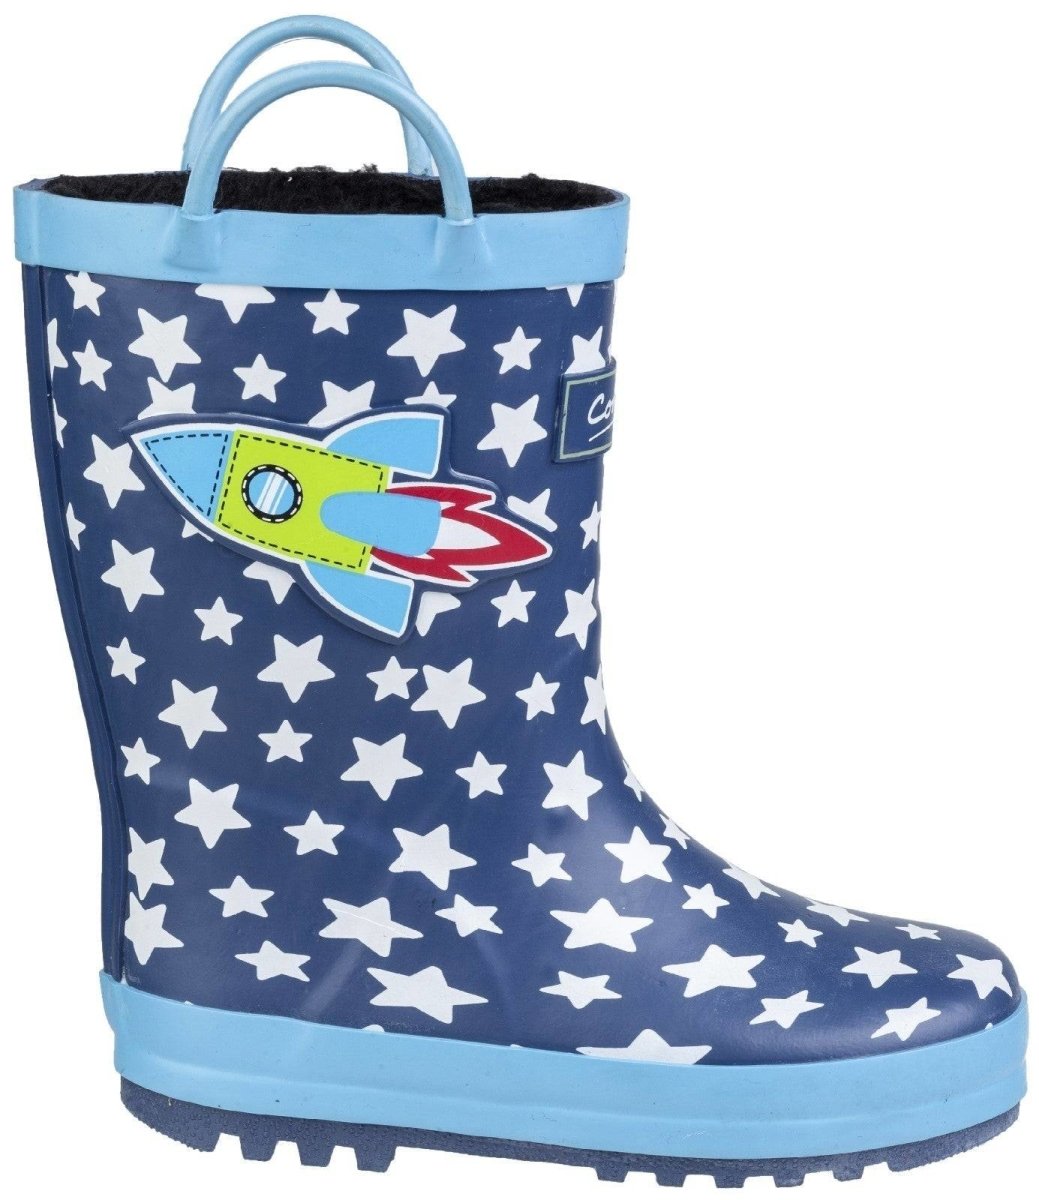 Cotswold Sprinkle Kids Wellington Boots - Shoe Store Direct